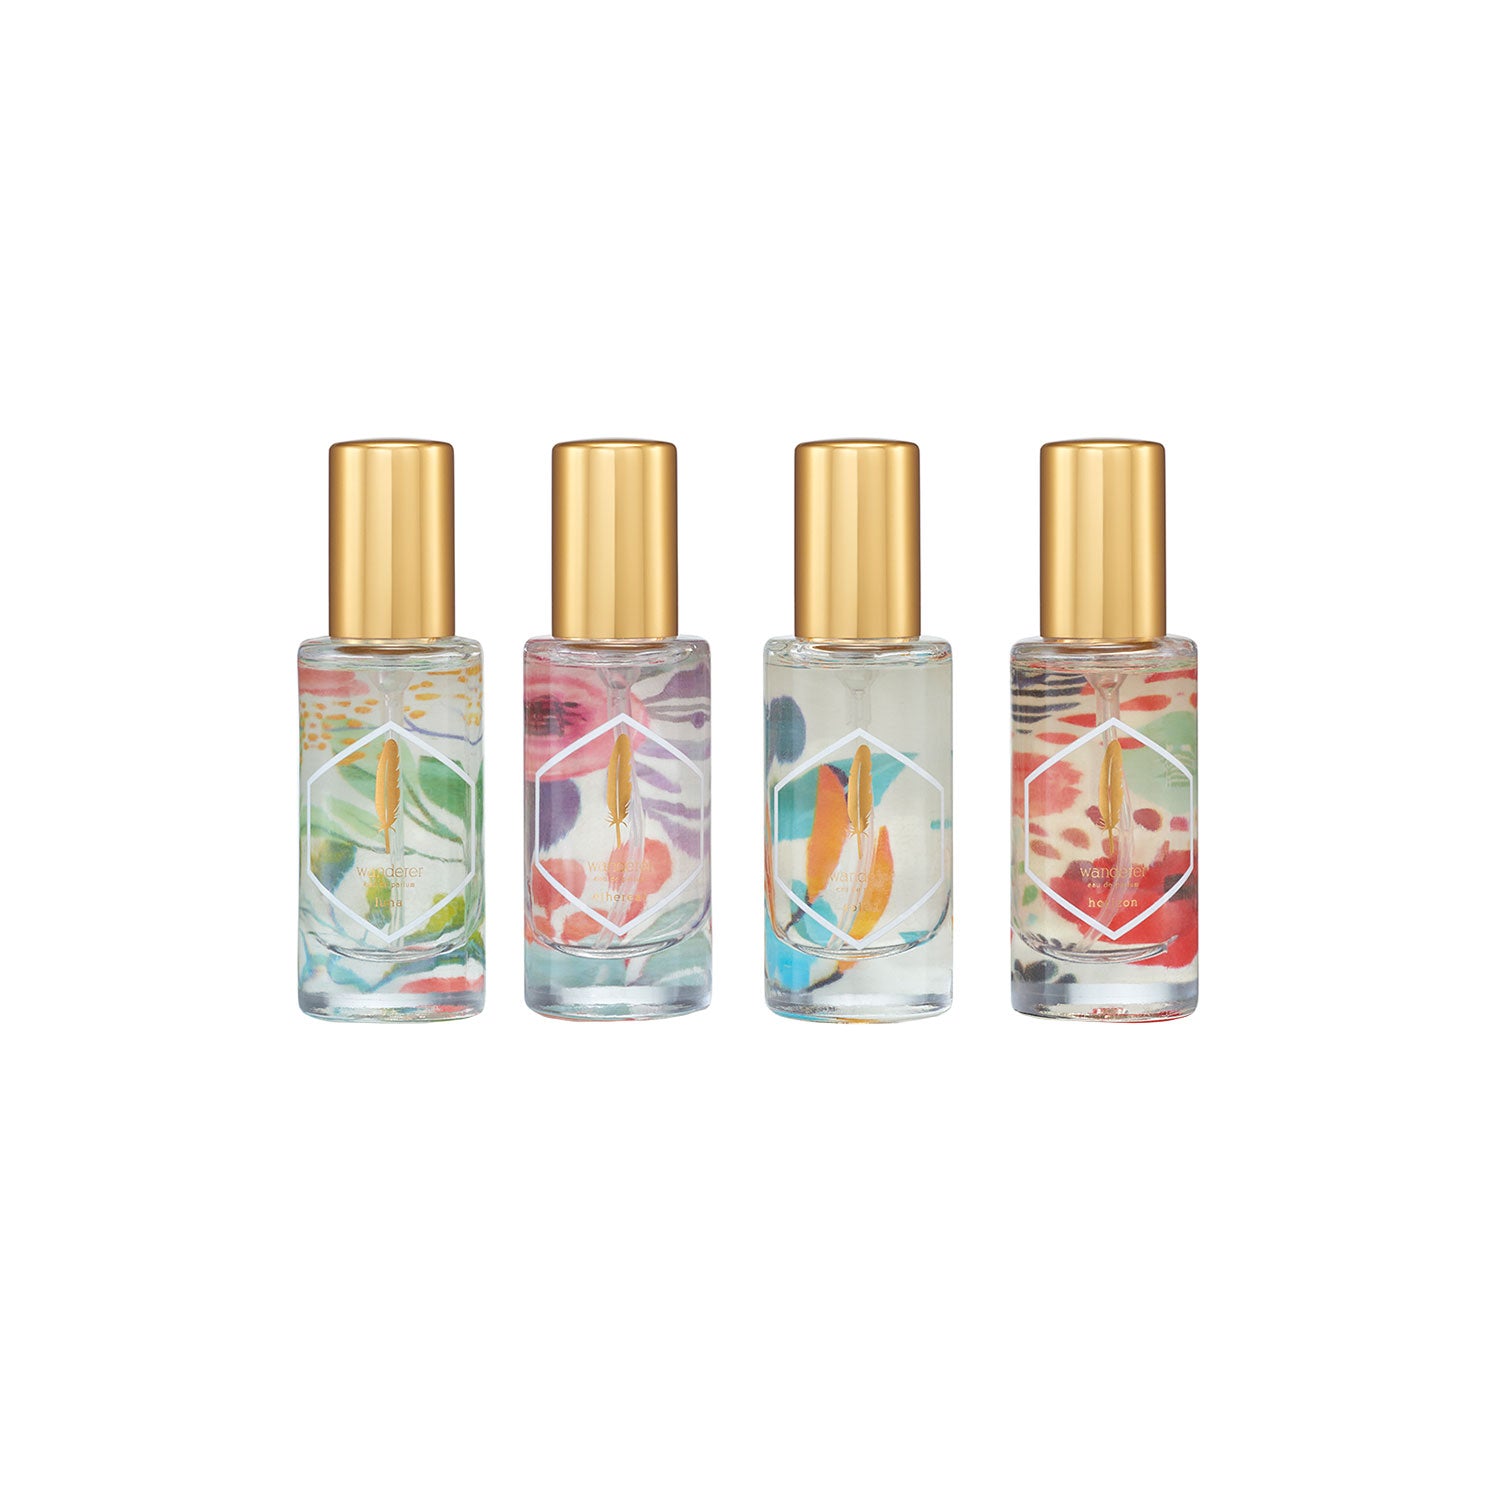 Forment] Signature Perfume Discovery Set 5 Collections (5ml Miniature Set)  K-beauty